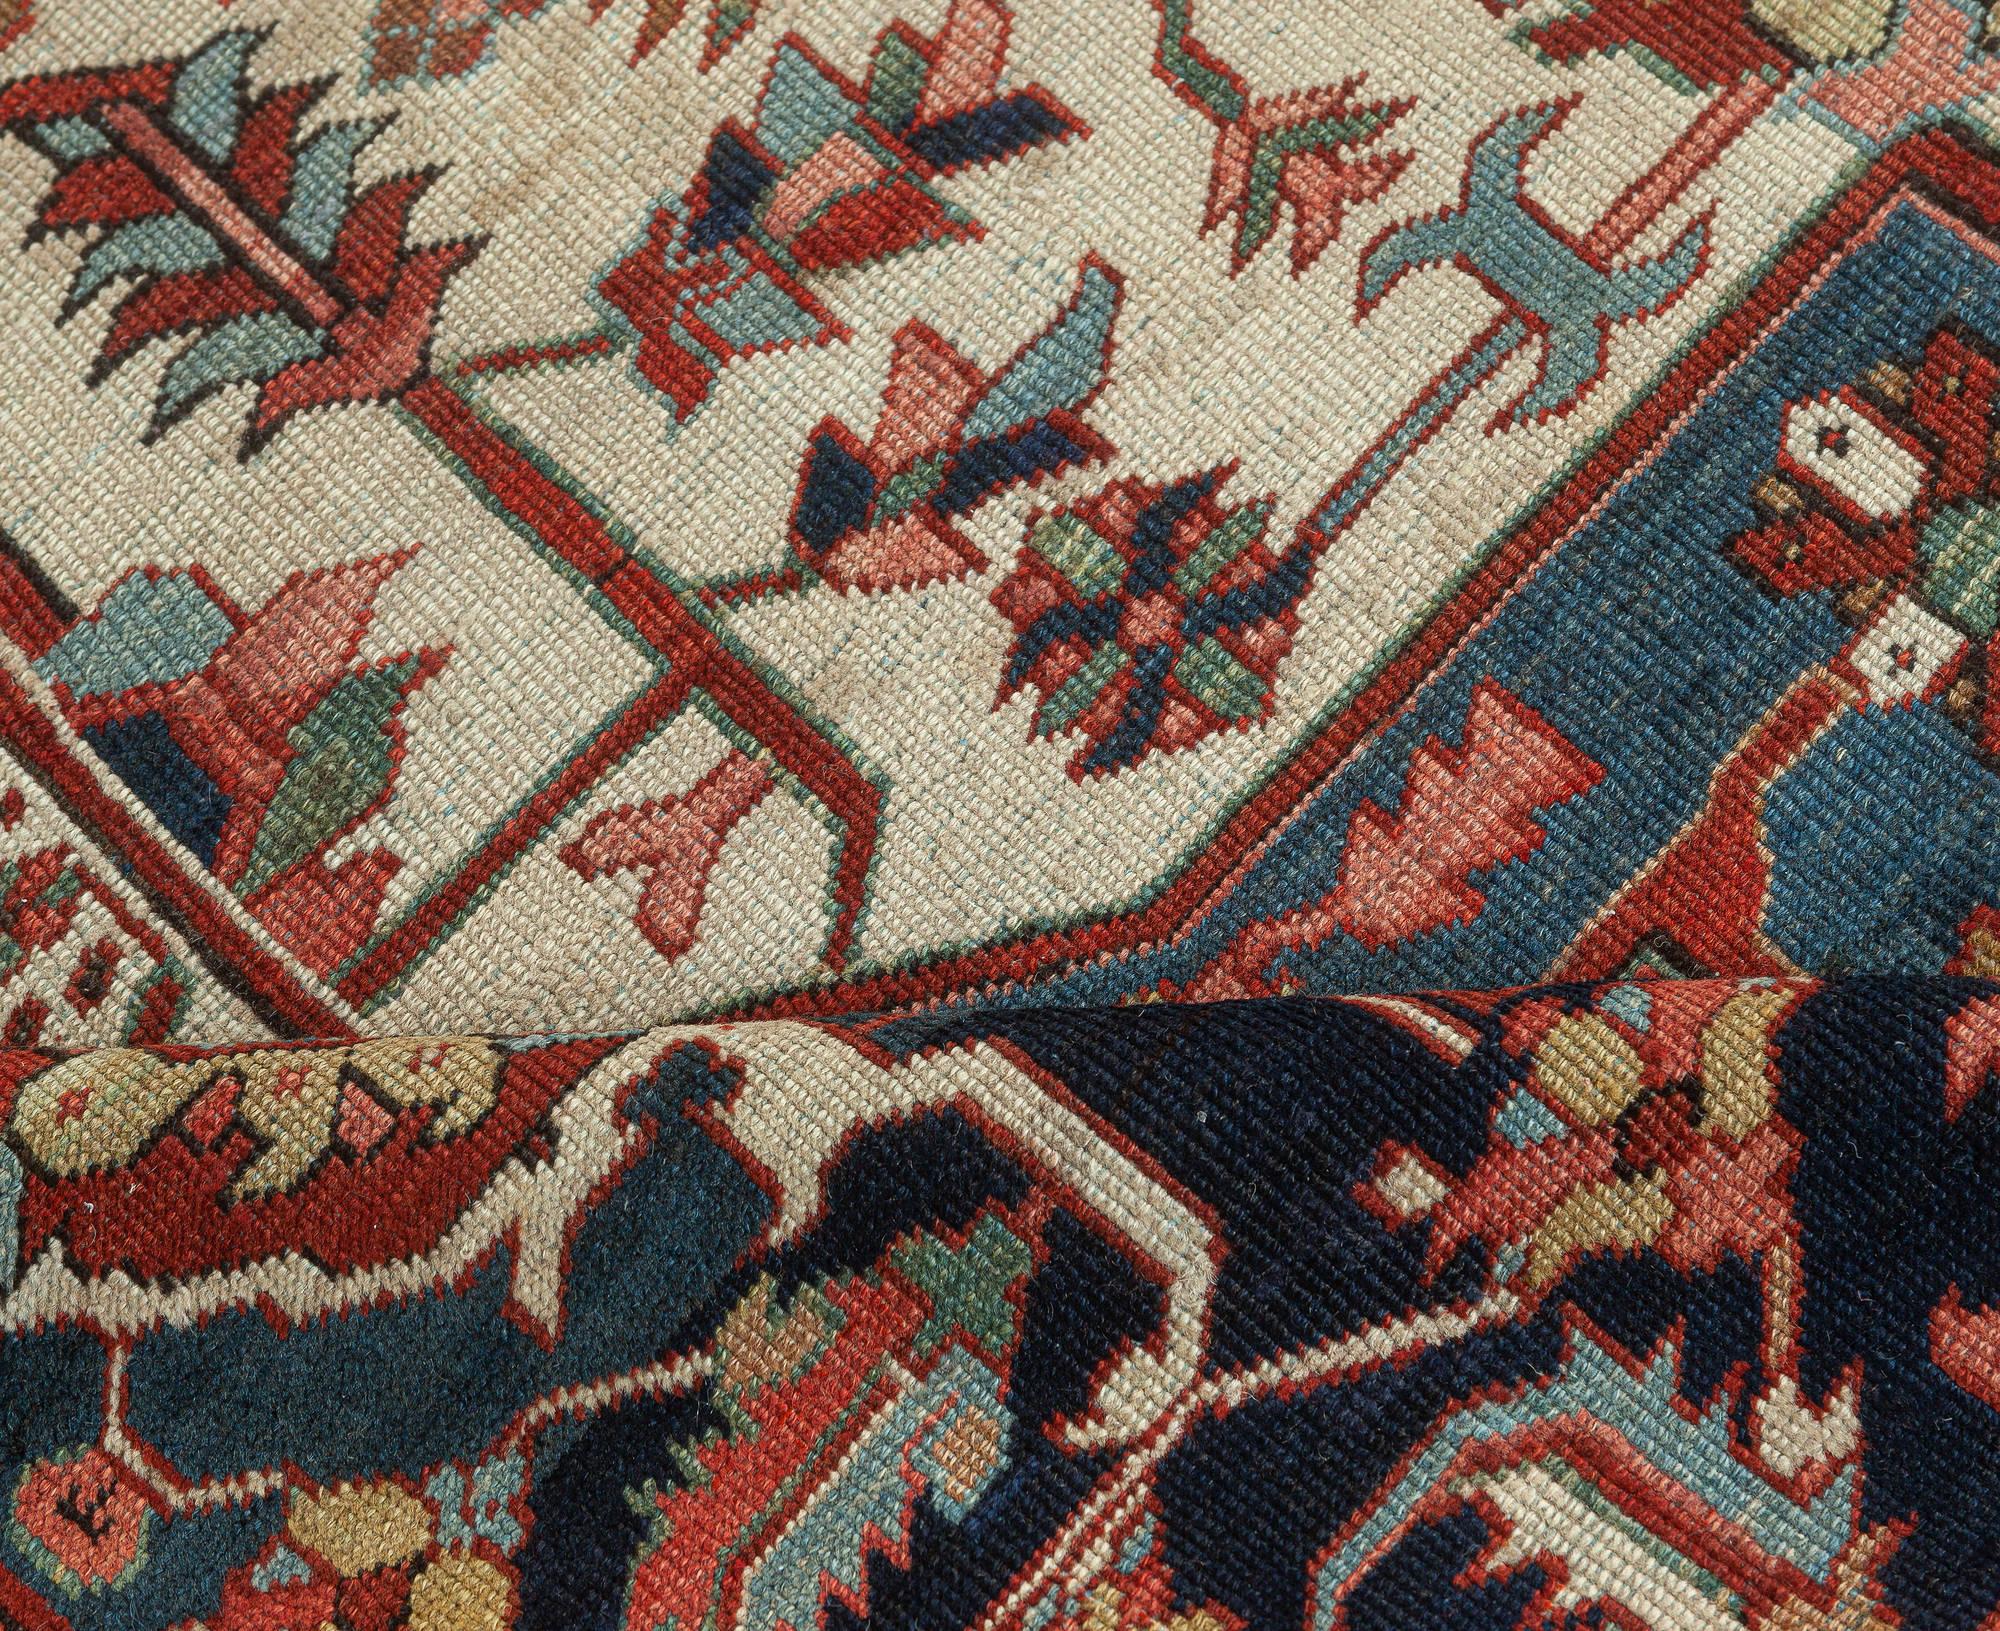 One-of-a-kind antique Persian Heriz rug in beige, blue, pink, and red.
Size: 11'10